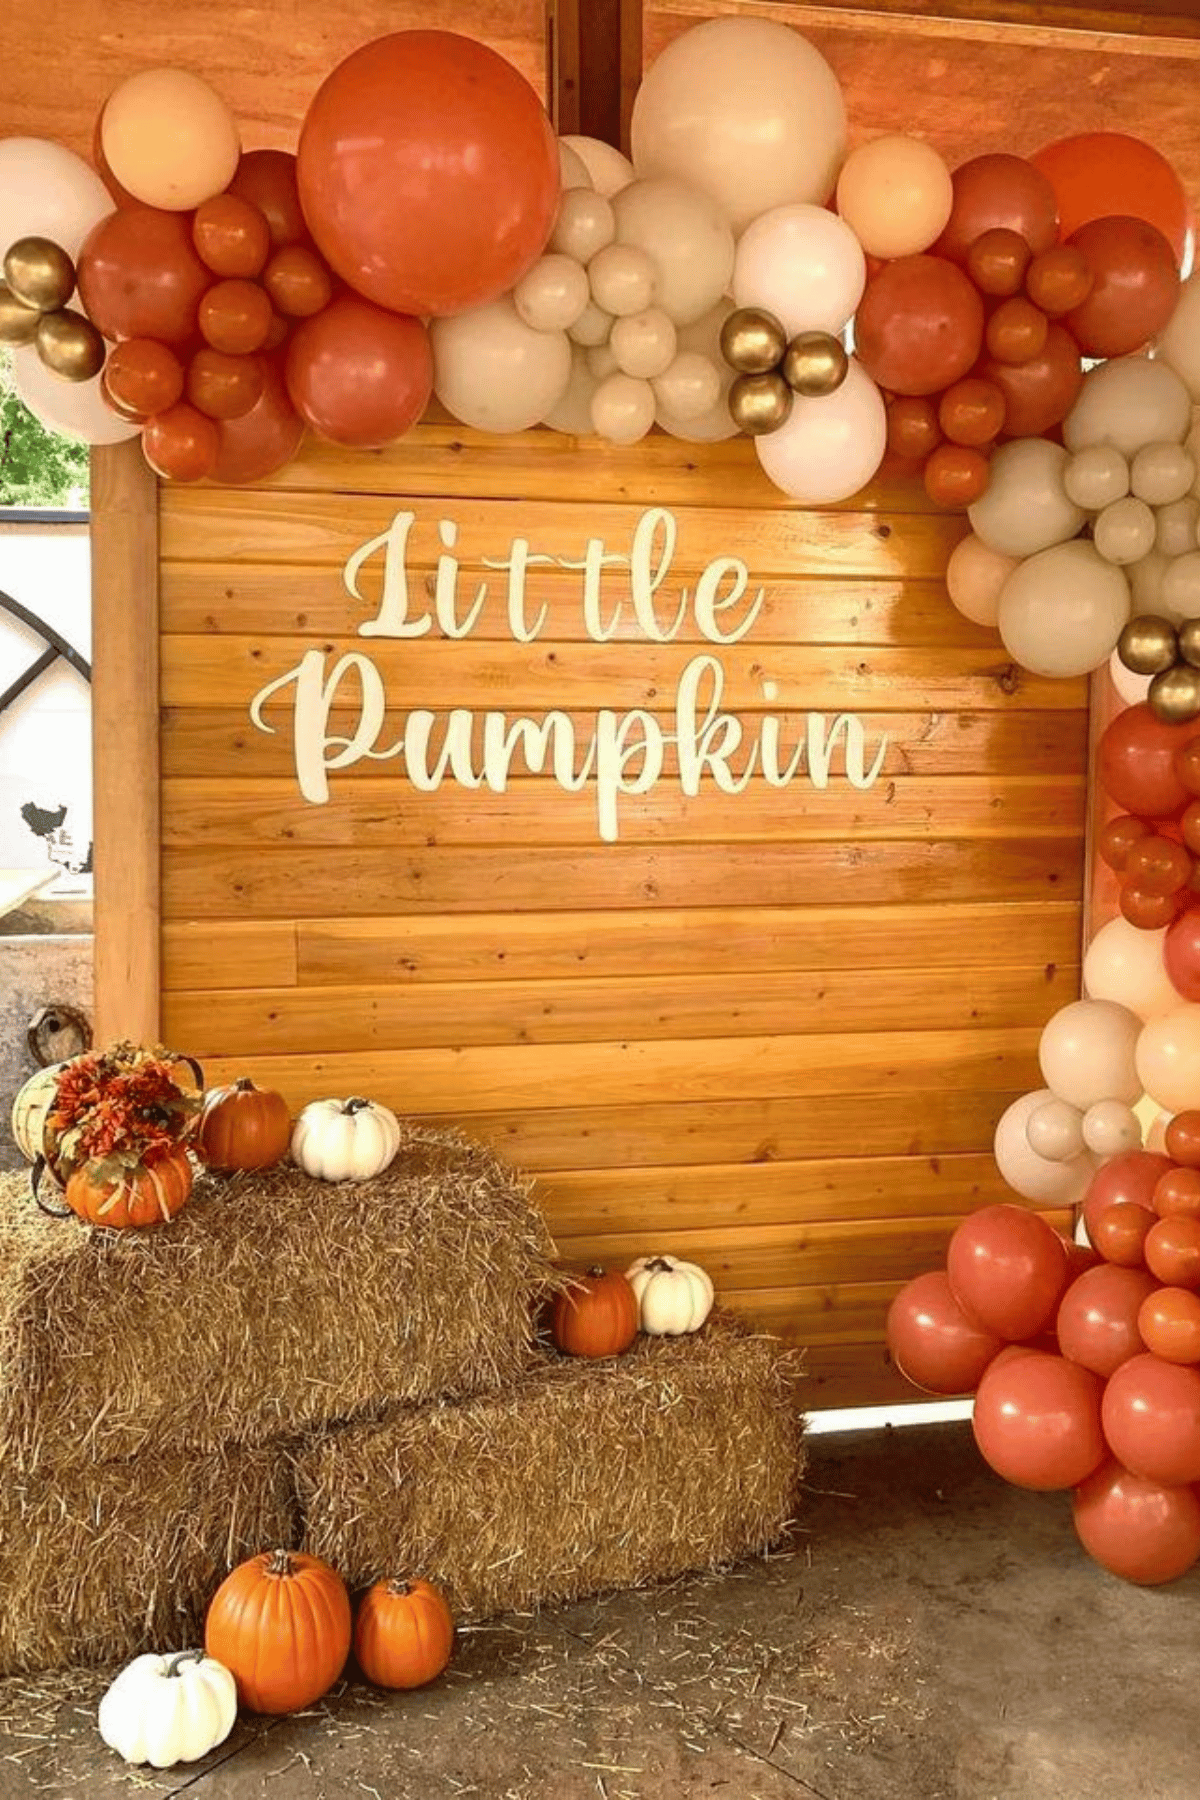 theme with hay, pumpkins and orange balloons